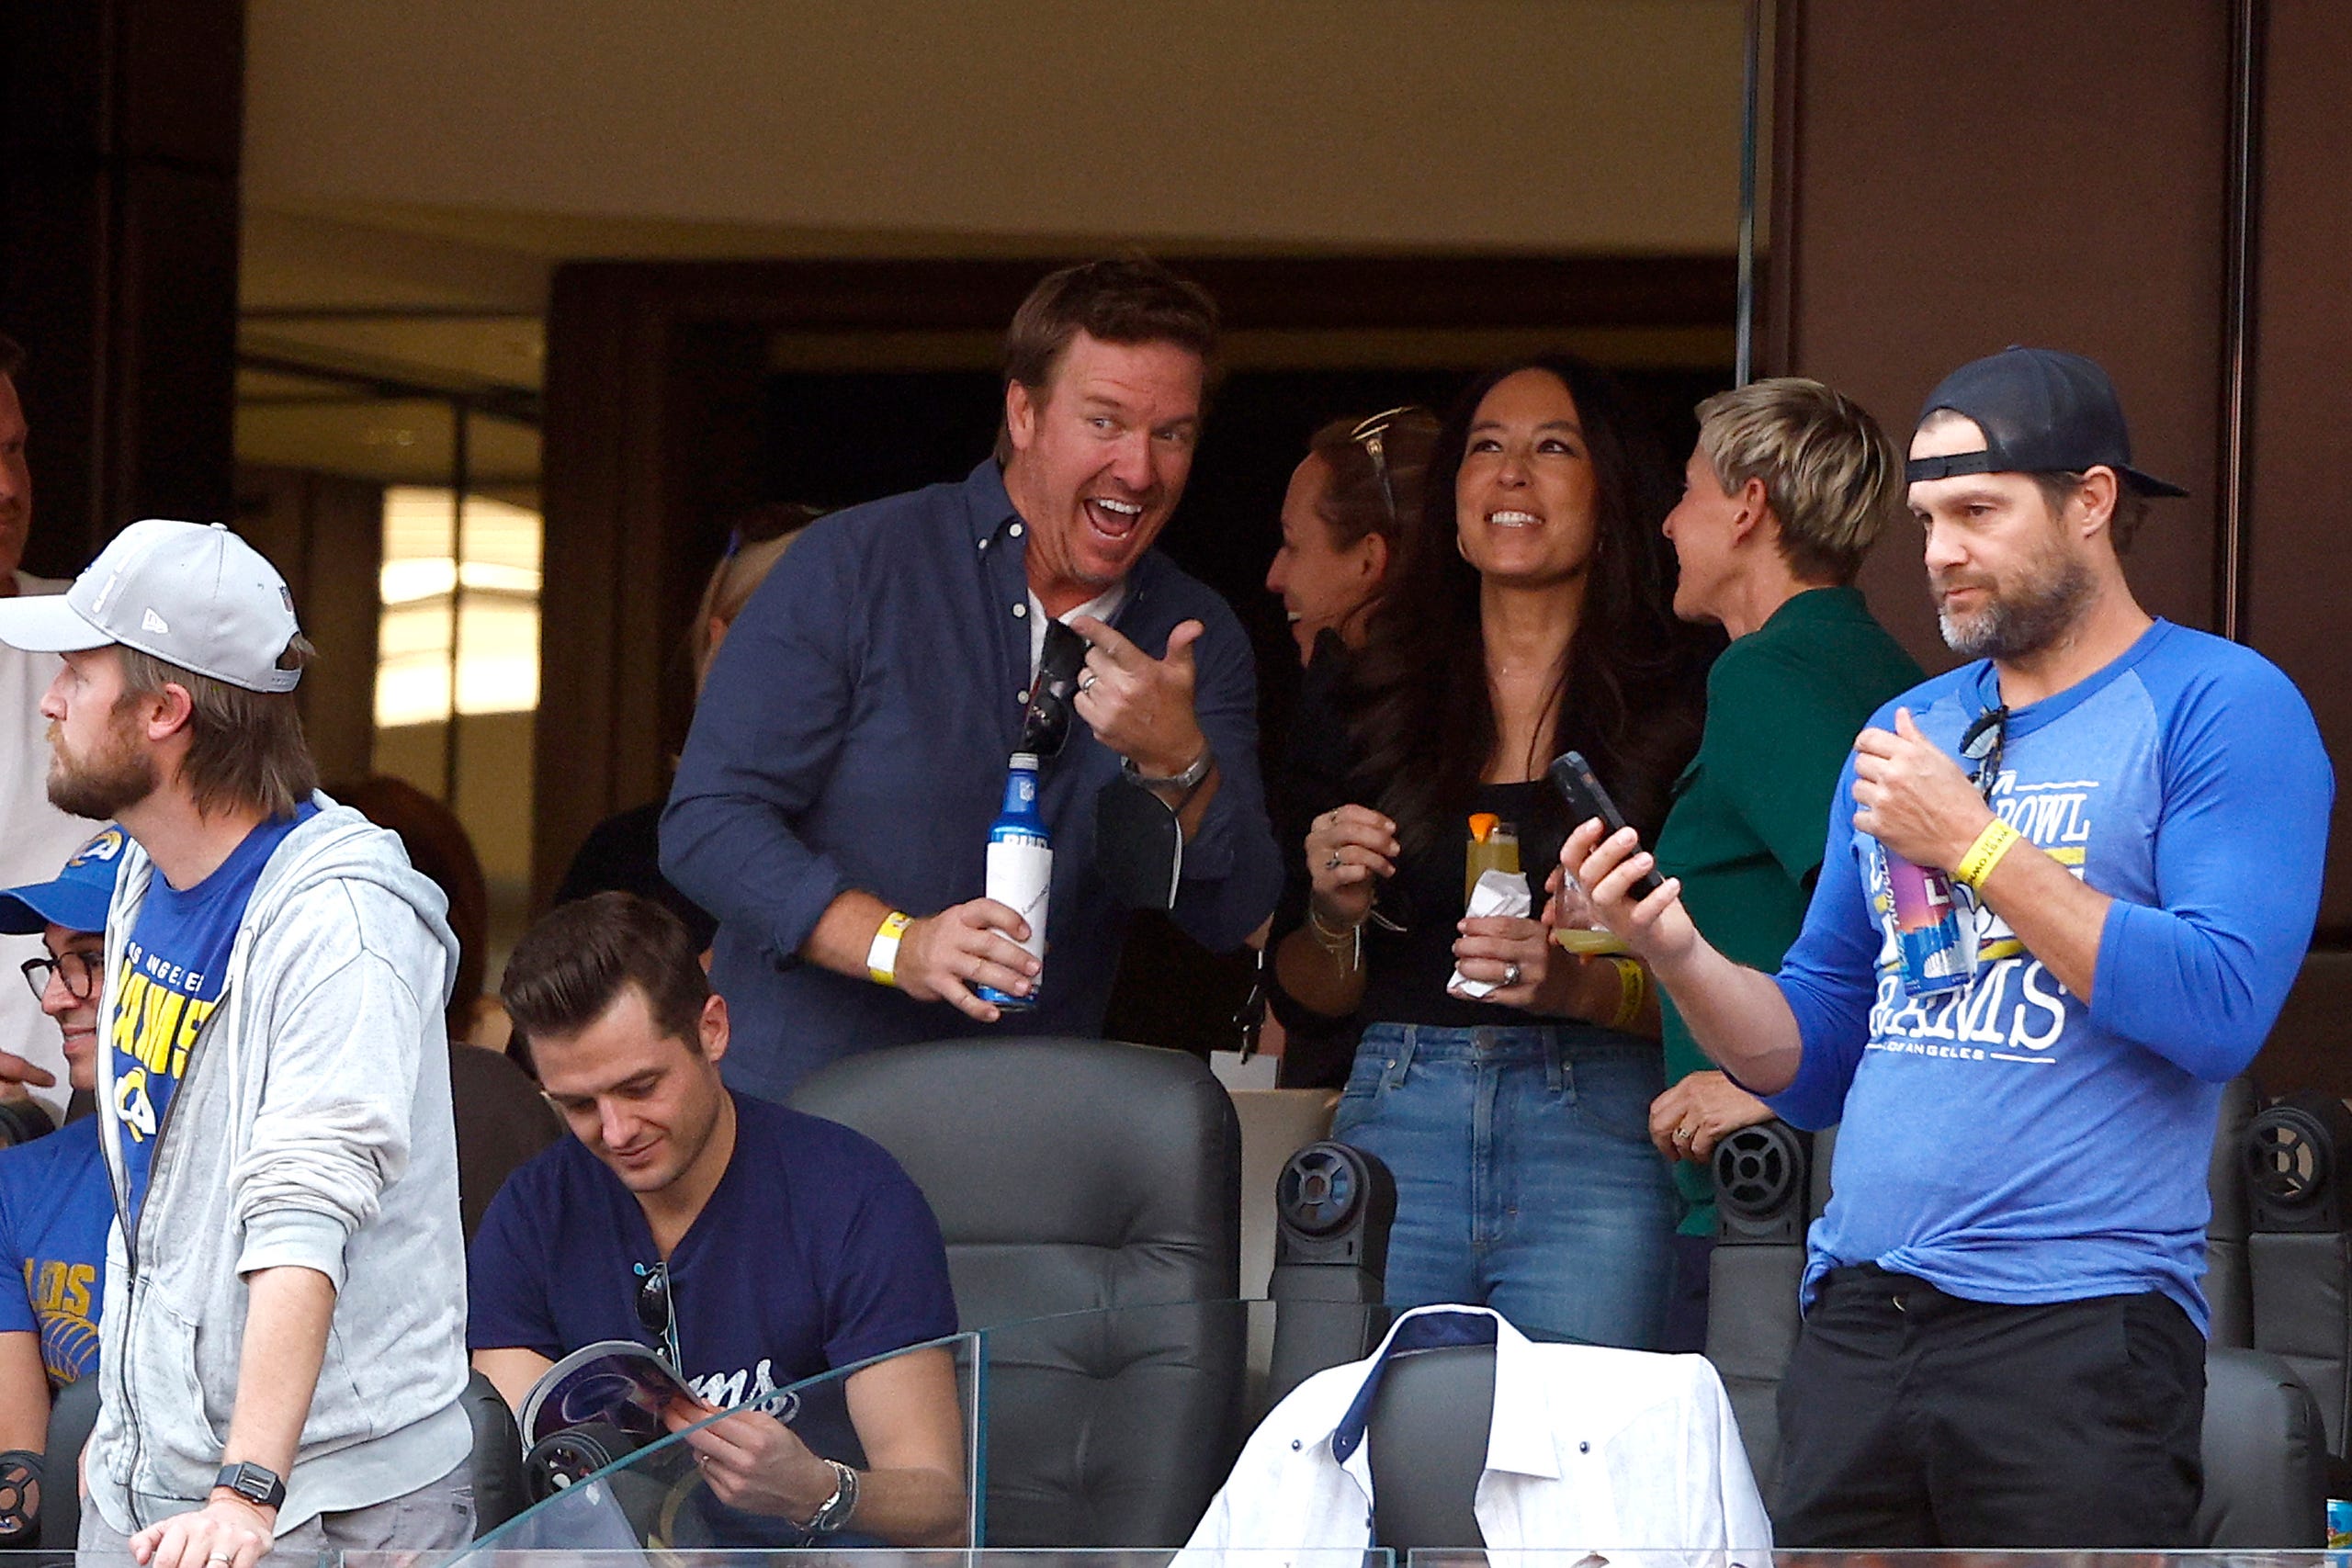 HGTV's Chip and Joanna Gaines attend Super Bowl LVI between the Los Angeles Rams and the Cincinnati Bengals at SoFi Stadium on February 13, 2022 in Inglewood, California.